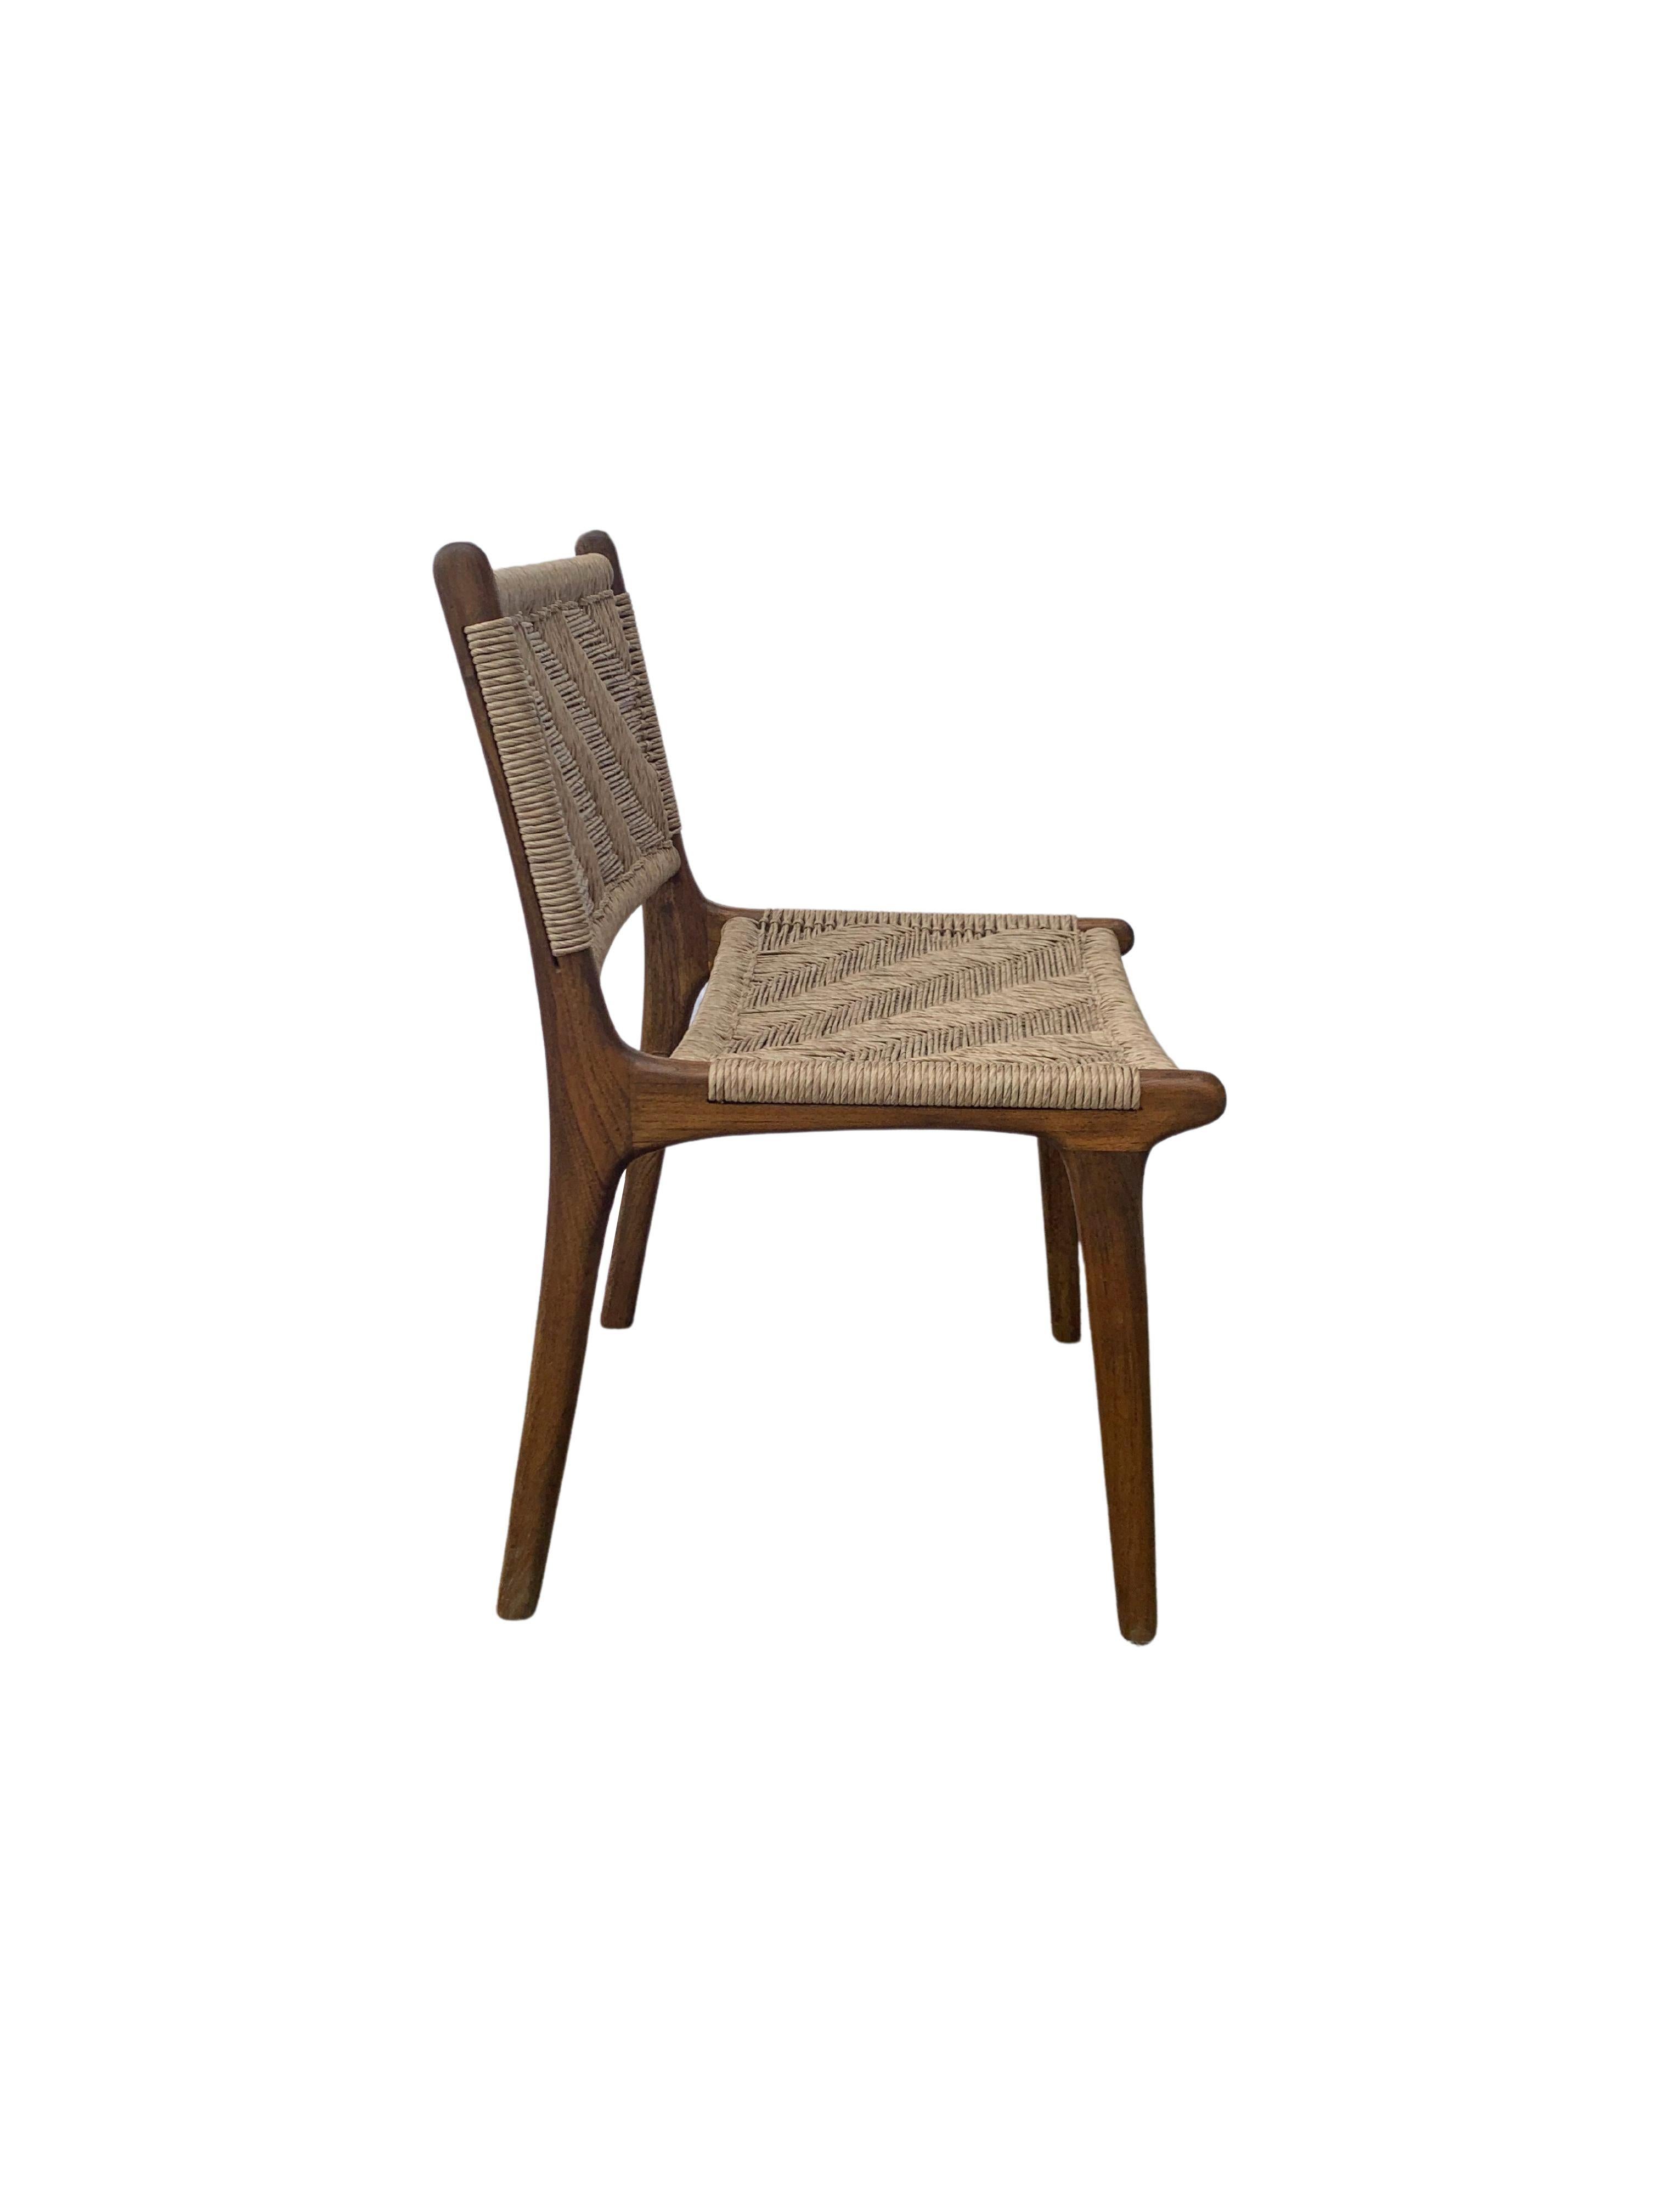 Modern Teak Wood Framed Chair with Woven Synthetic Rattan Seat, Dark Wood Finish